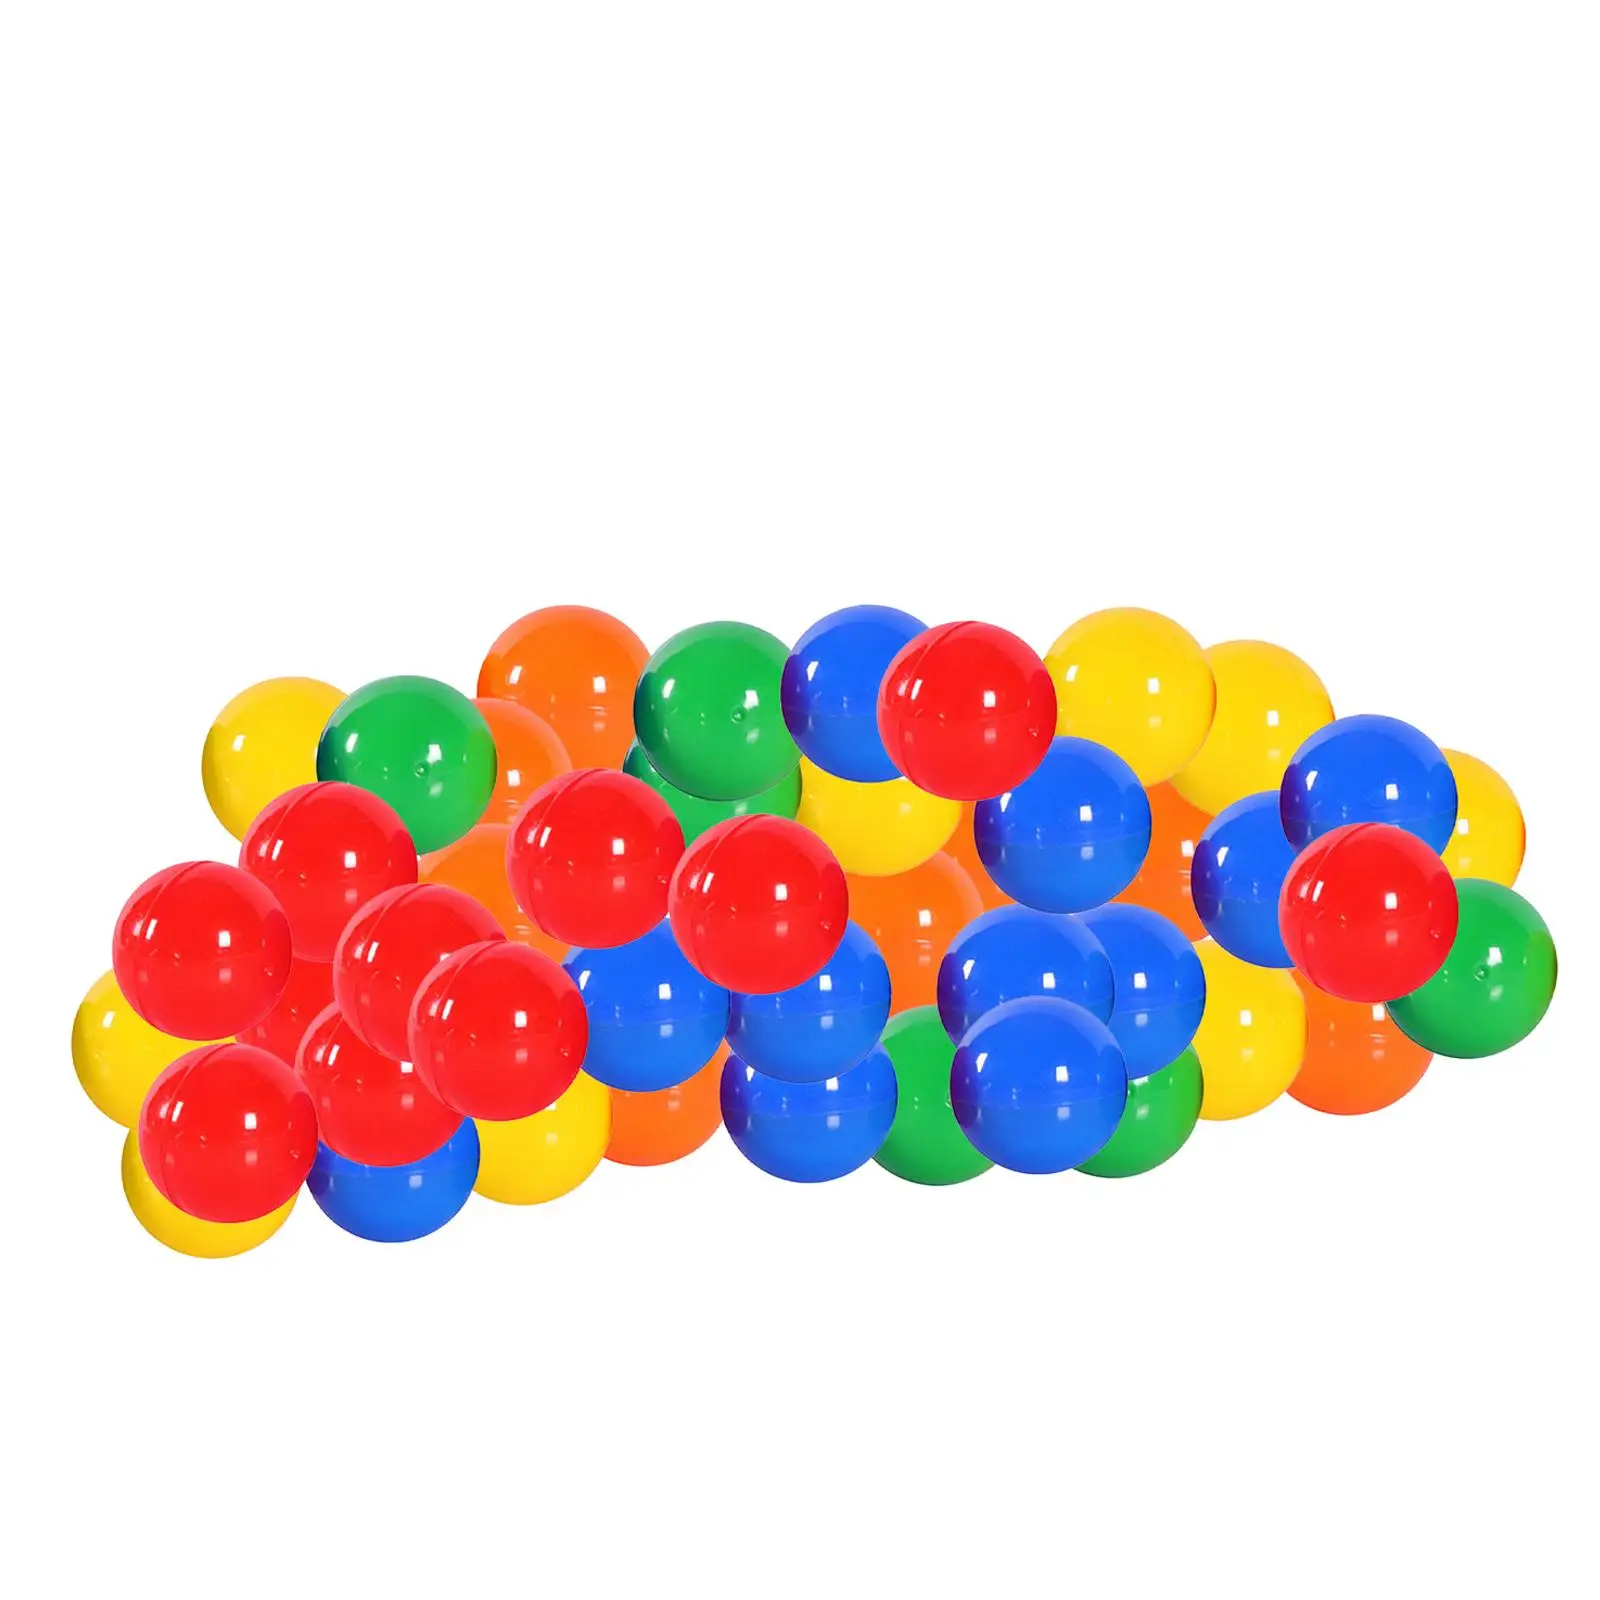 50Pcs Bingo Ball Opening Portable Direct Replaces Accessories Lottery Balls for Birthday Large Group Games Nights camping